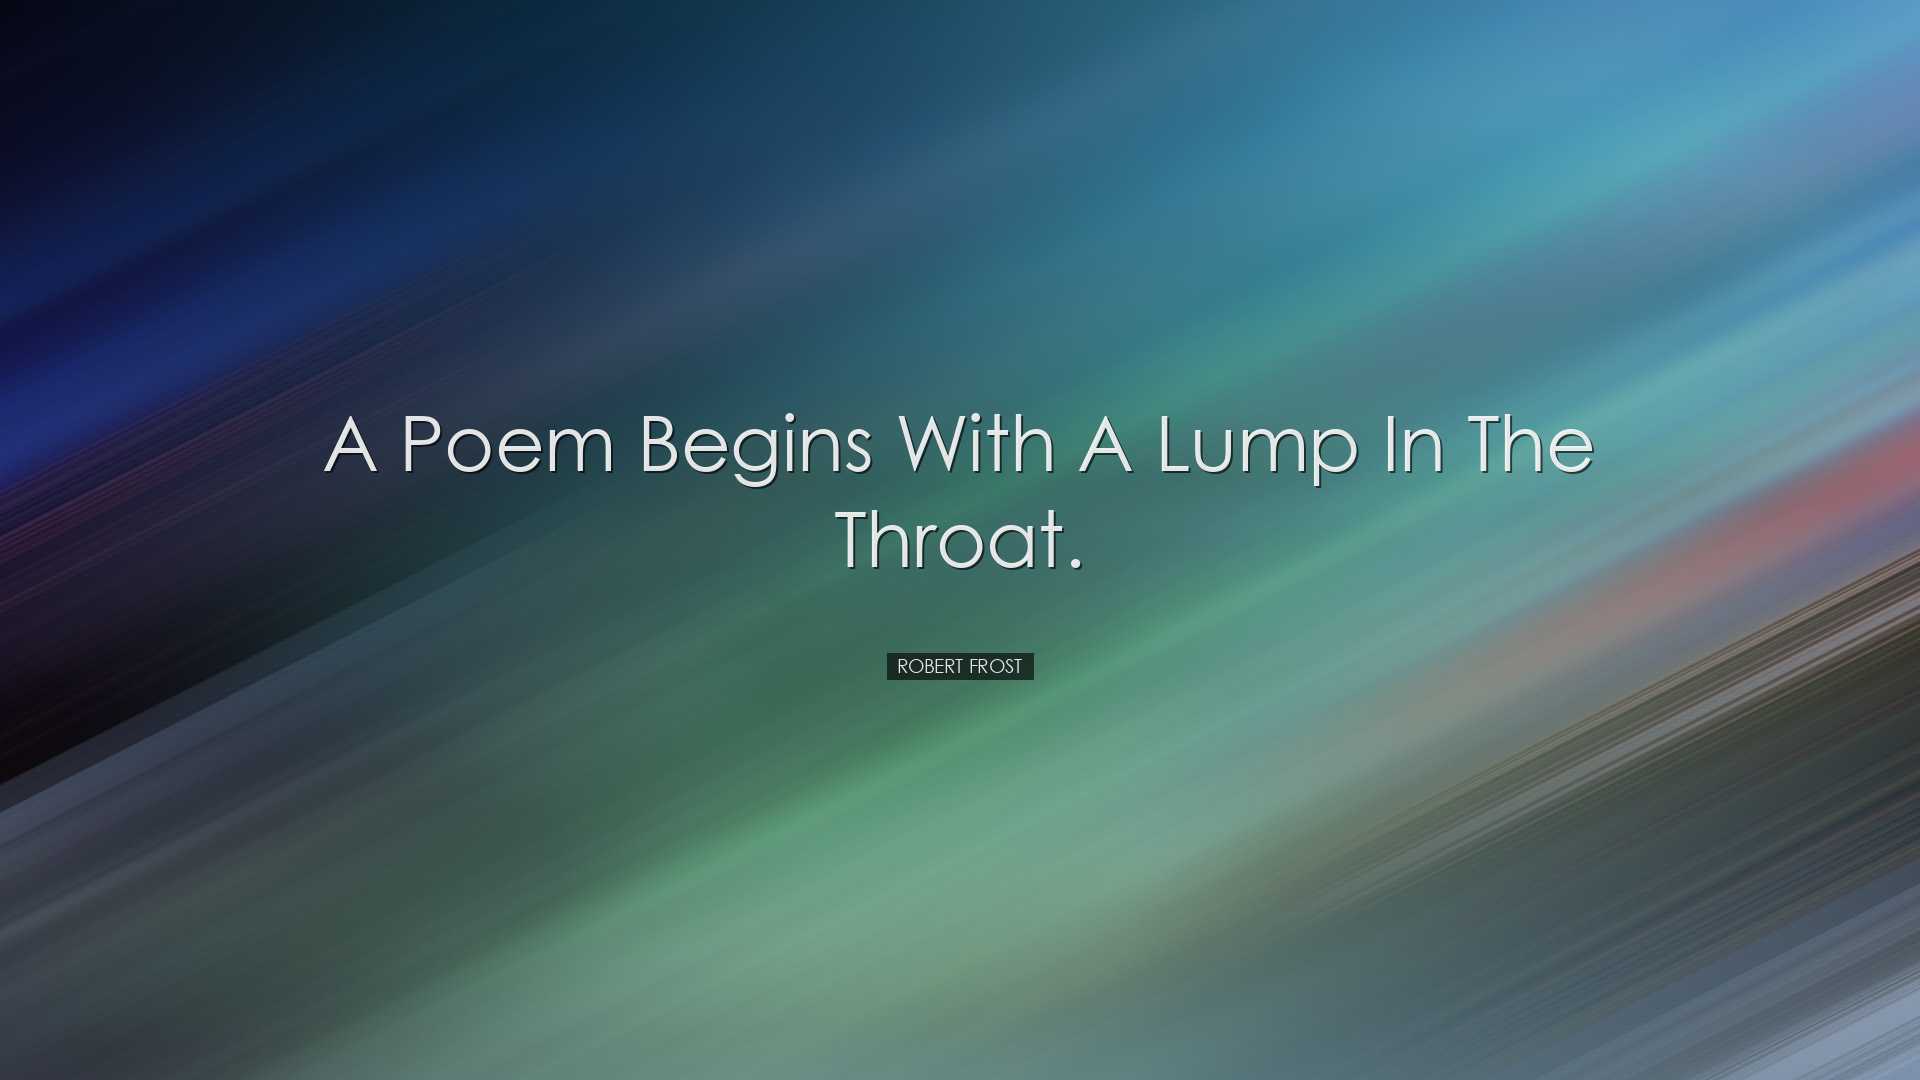 A poem begins with a lump in the throat. - Robert Frost